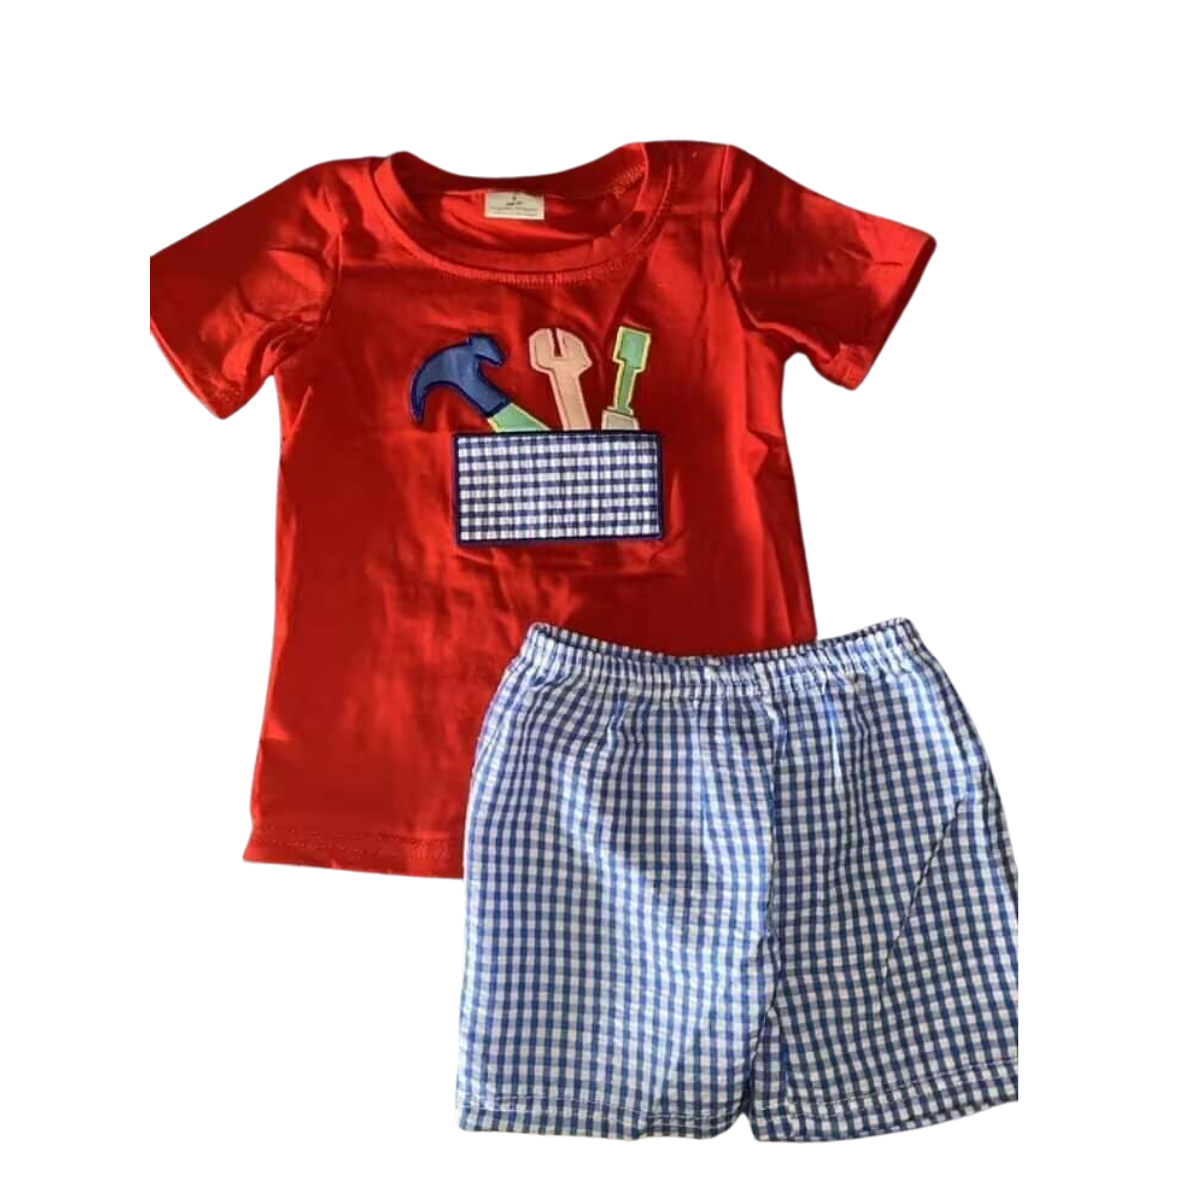 Tool Belt Plaid Whimsical Summer Shorts Outfit -Kids